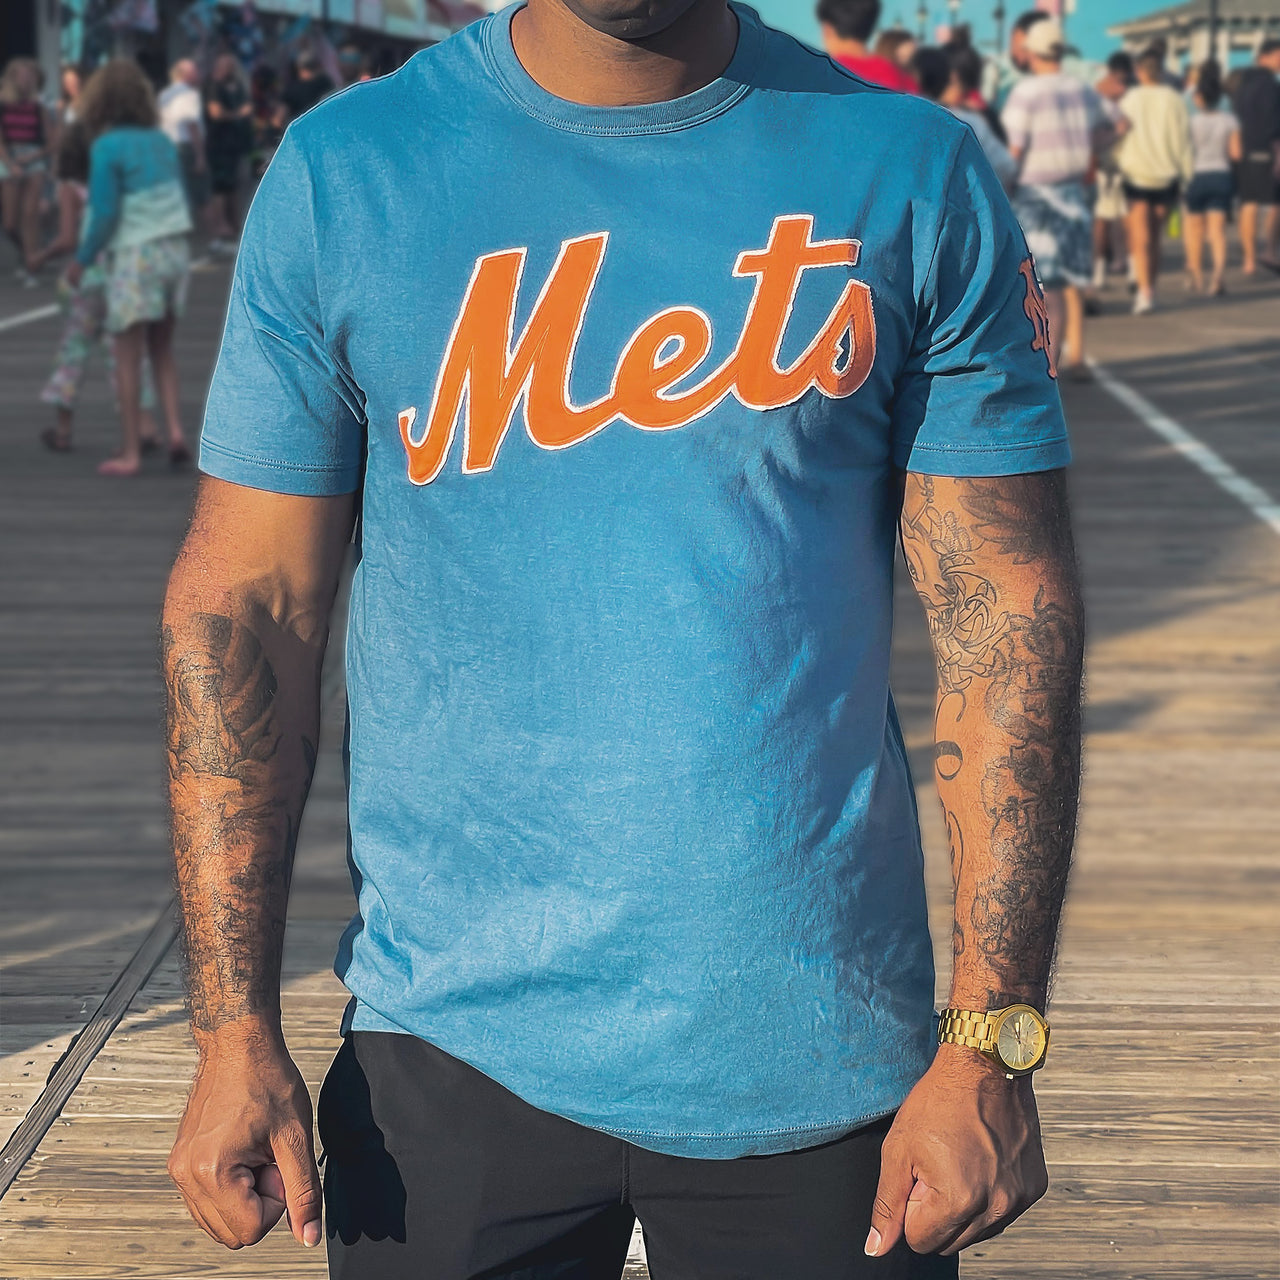 The front of the New York Mets Wordmark Franklin Fieldhouse Tshirt WIth Mets Logo | Cadet Blue T-Shirt